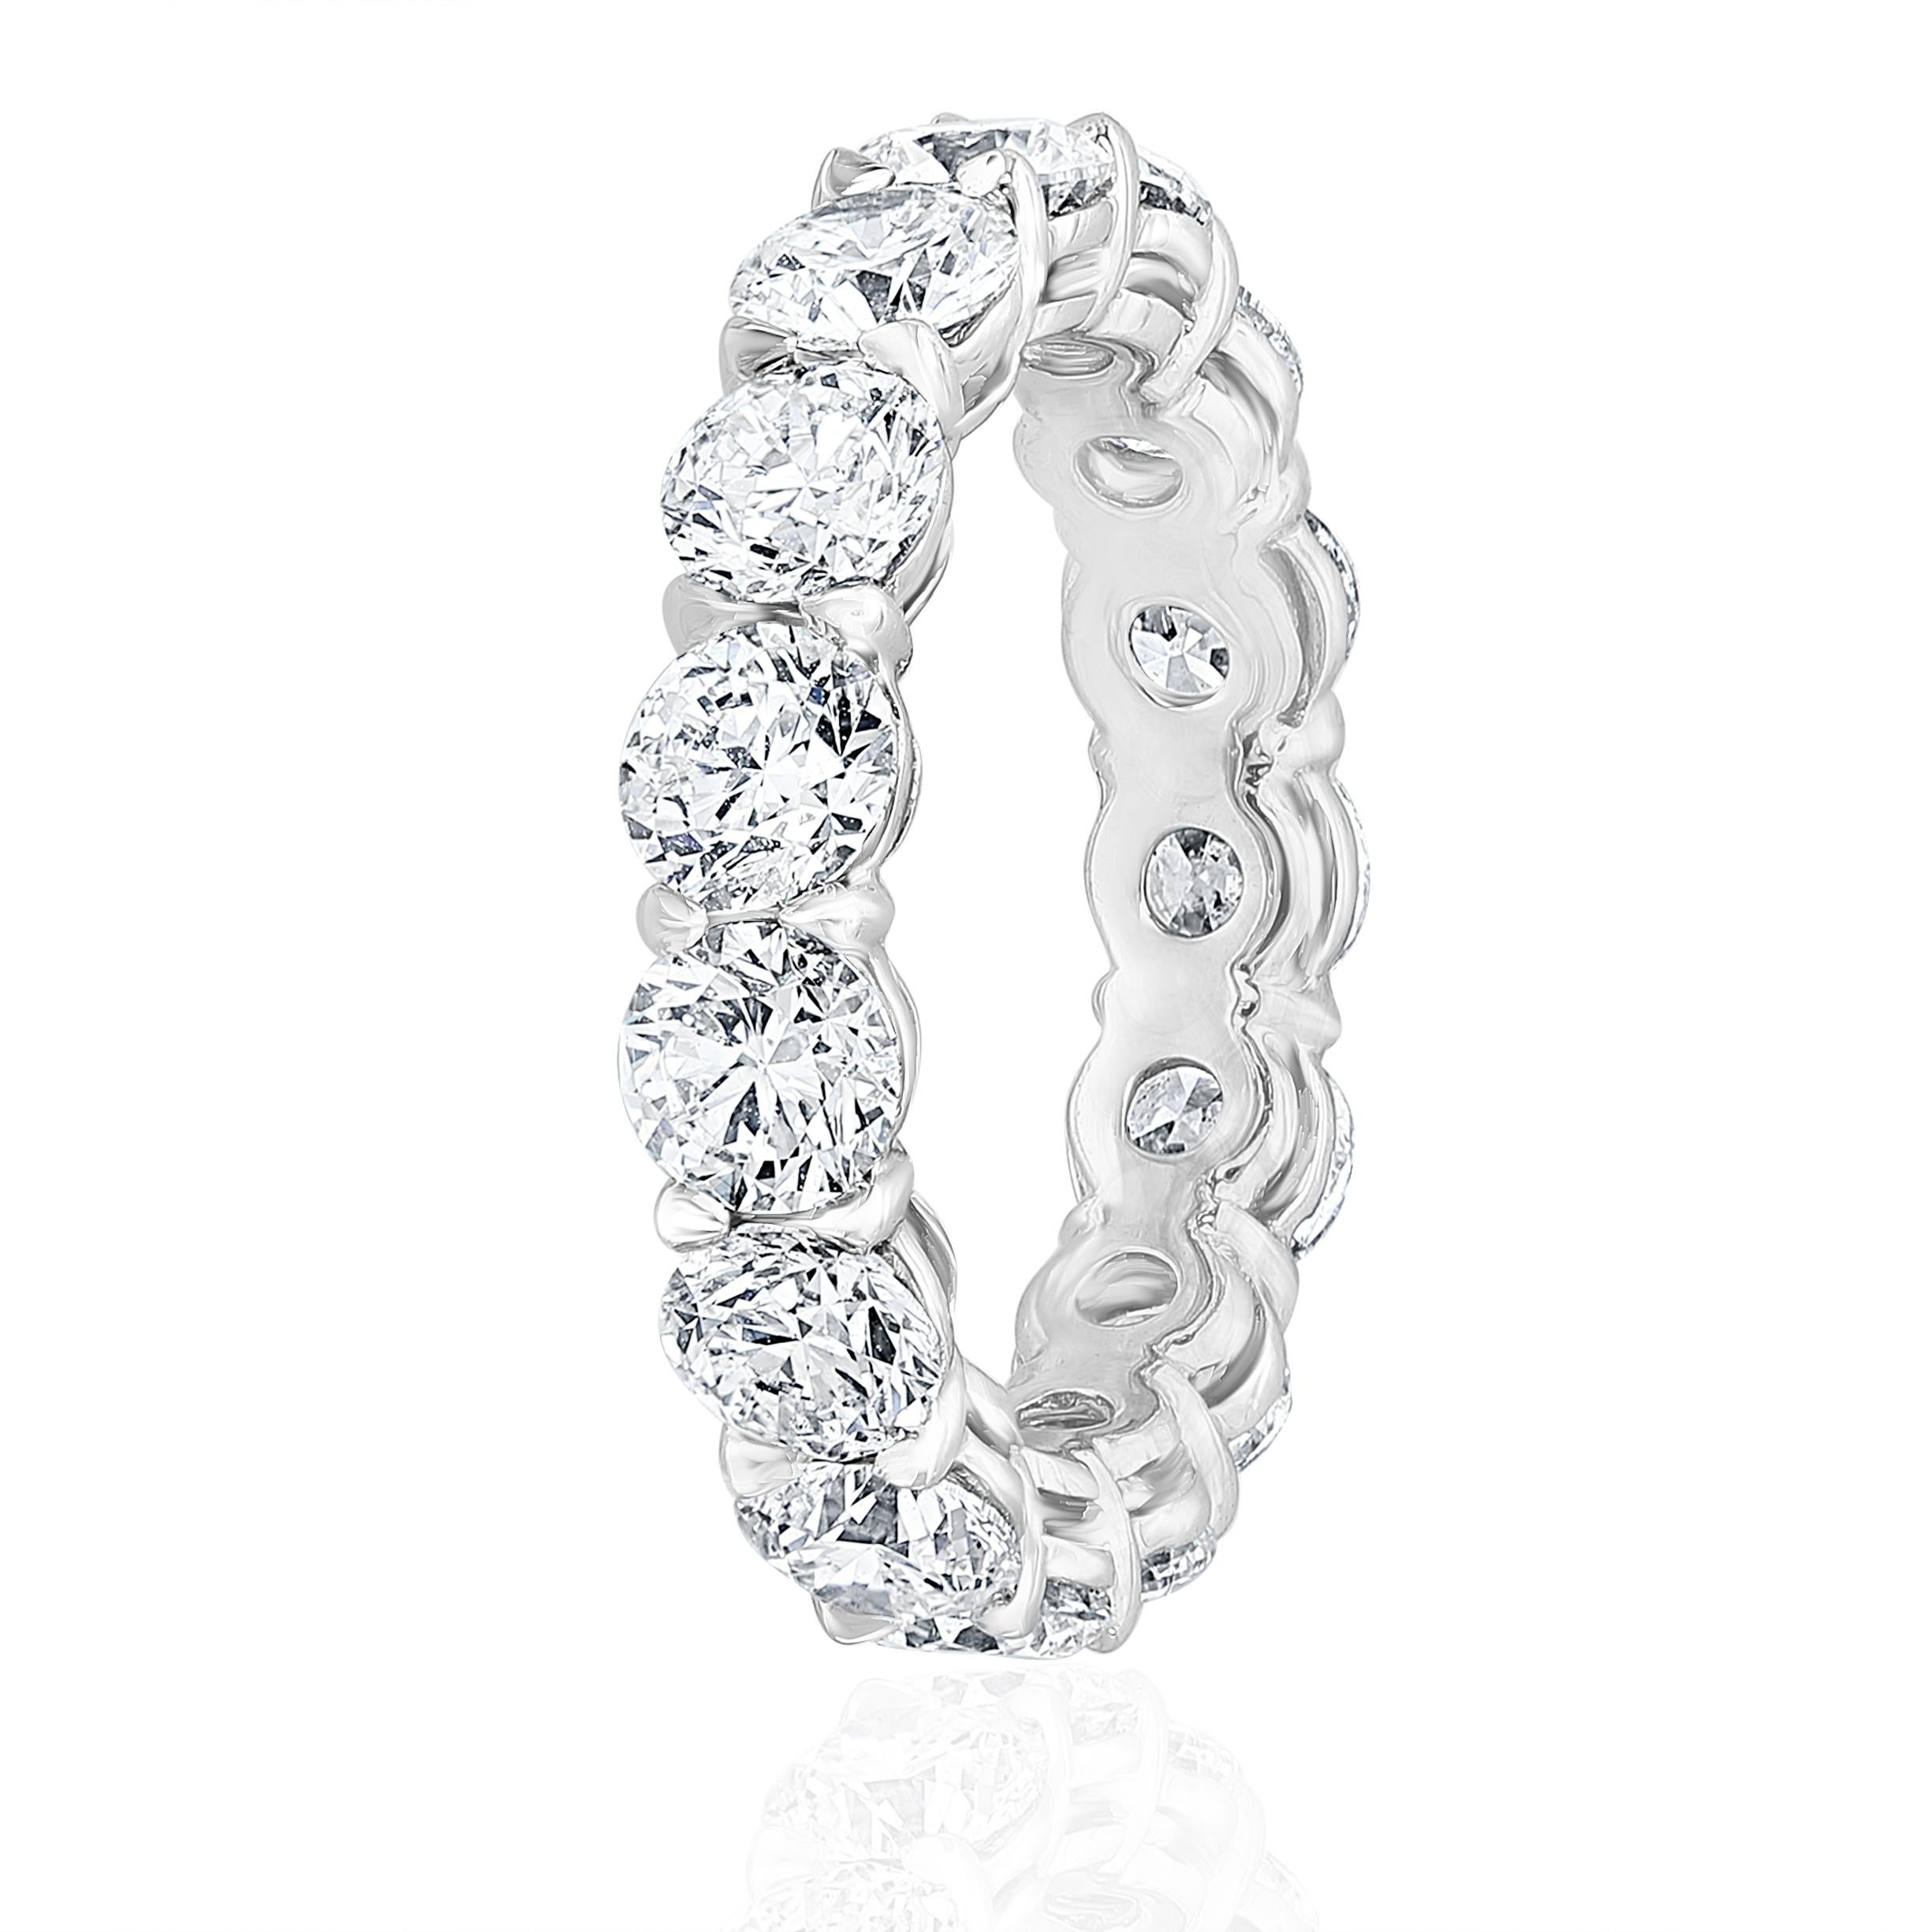 This beautiful Eternity Ring is set with 15 perfectly matched Round Brilliant Cut Diamonds, each weighing between 0.30ct to 0.31ct totaling 4.62 Carats. Made in New York City using Platinum 950. Fits US Size 6.

Diamonds are of G-H color and SI